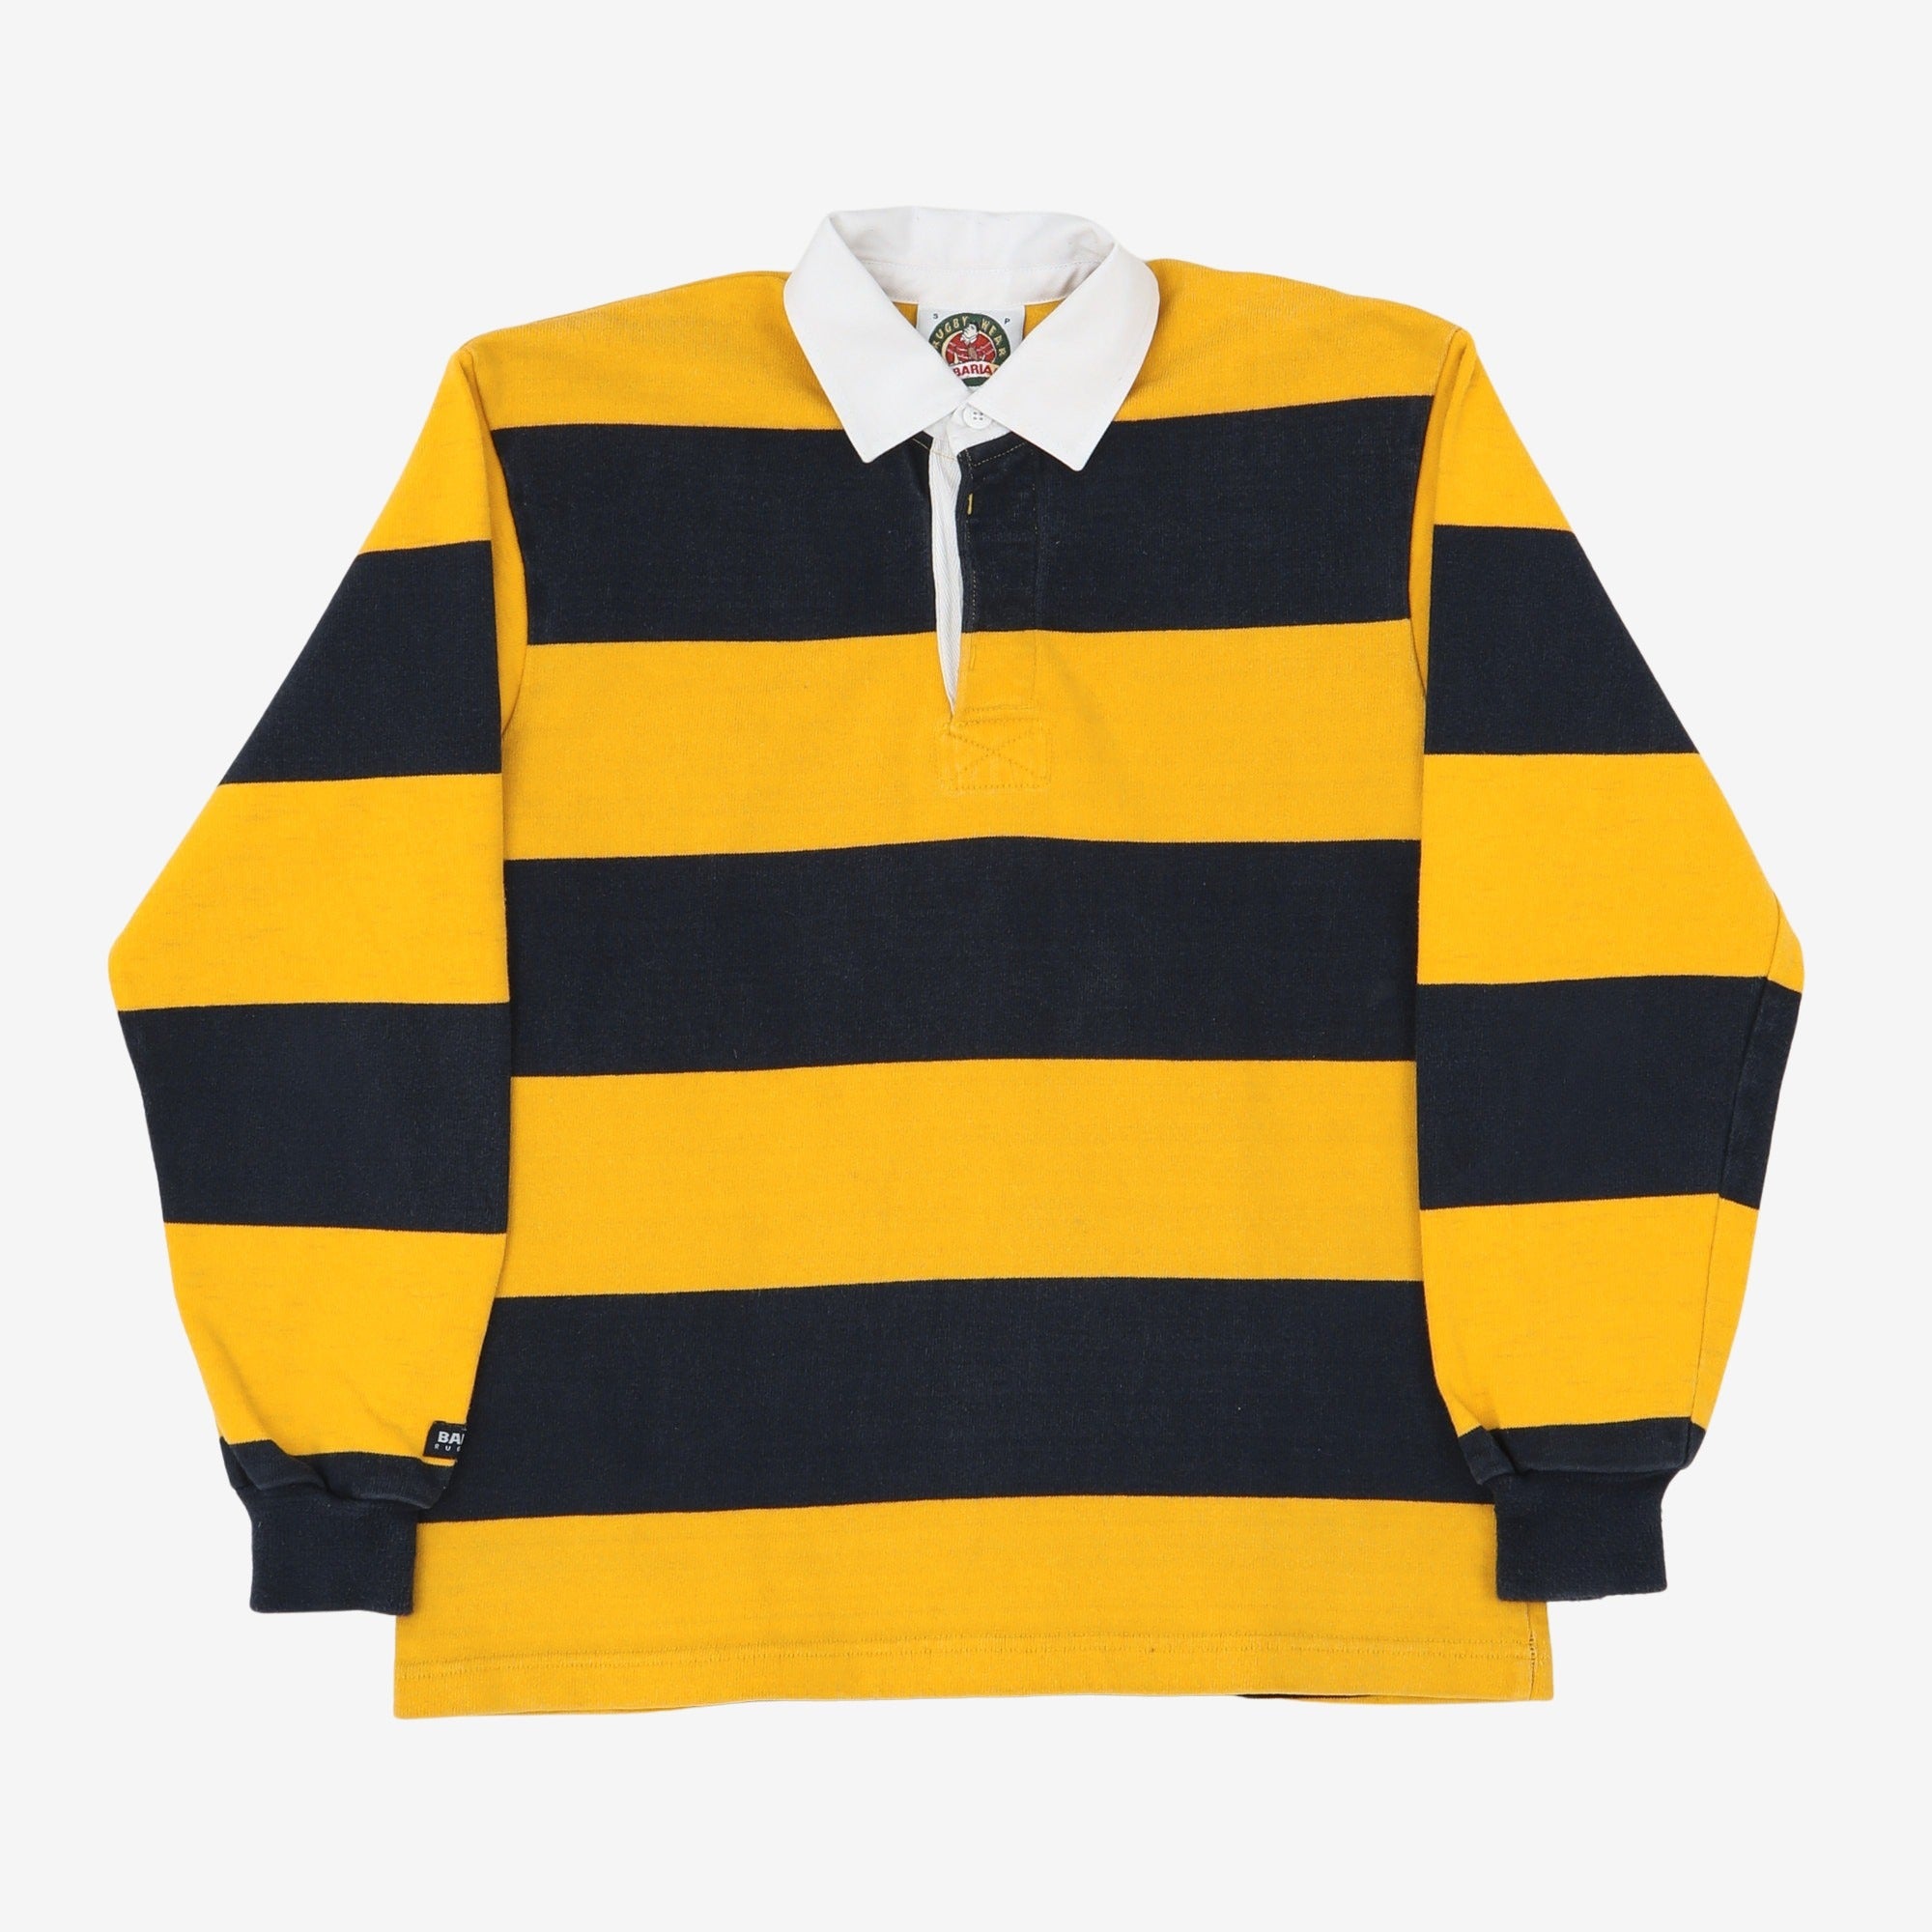 Rugby Long Sleeve Jersey